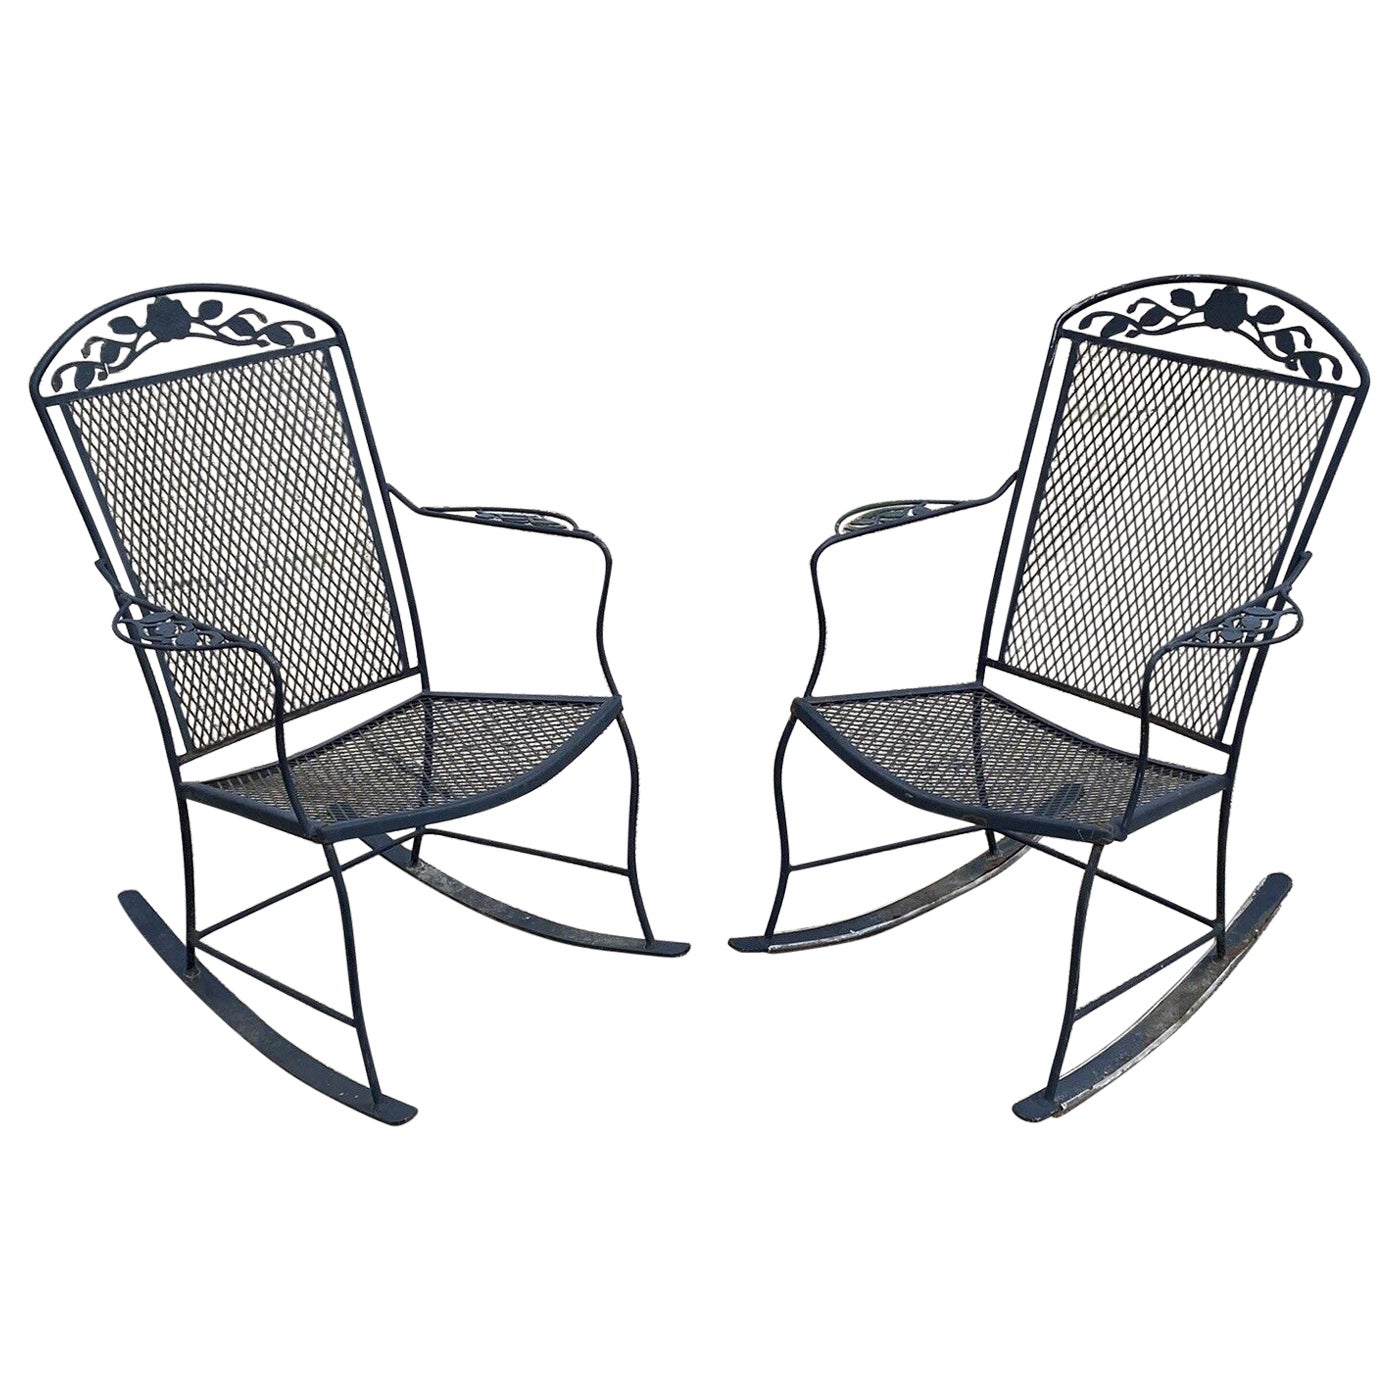 Vintage Wrought Iron Victorian Style Garden Patio Rocker Rocking Chairs - a Pair For Sale